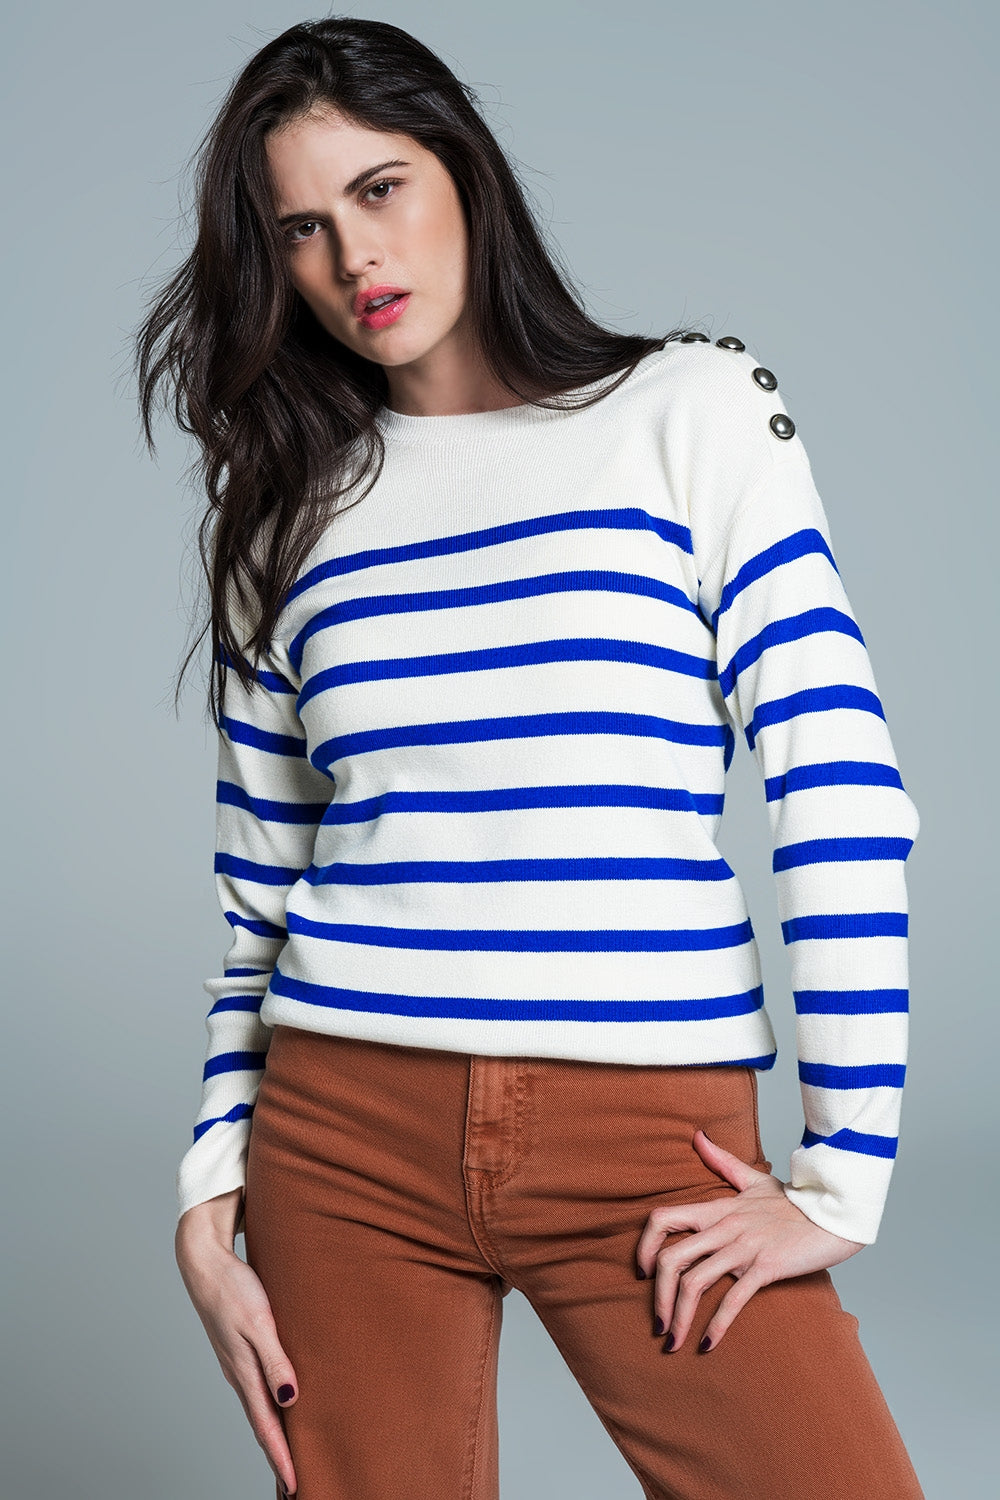 Q2 White sweater with buttons on shoulders and blue stripes